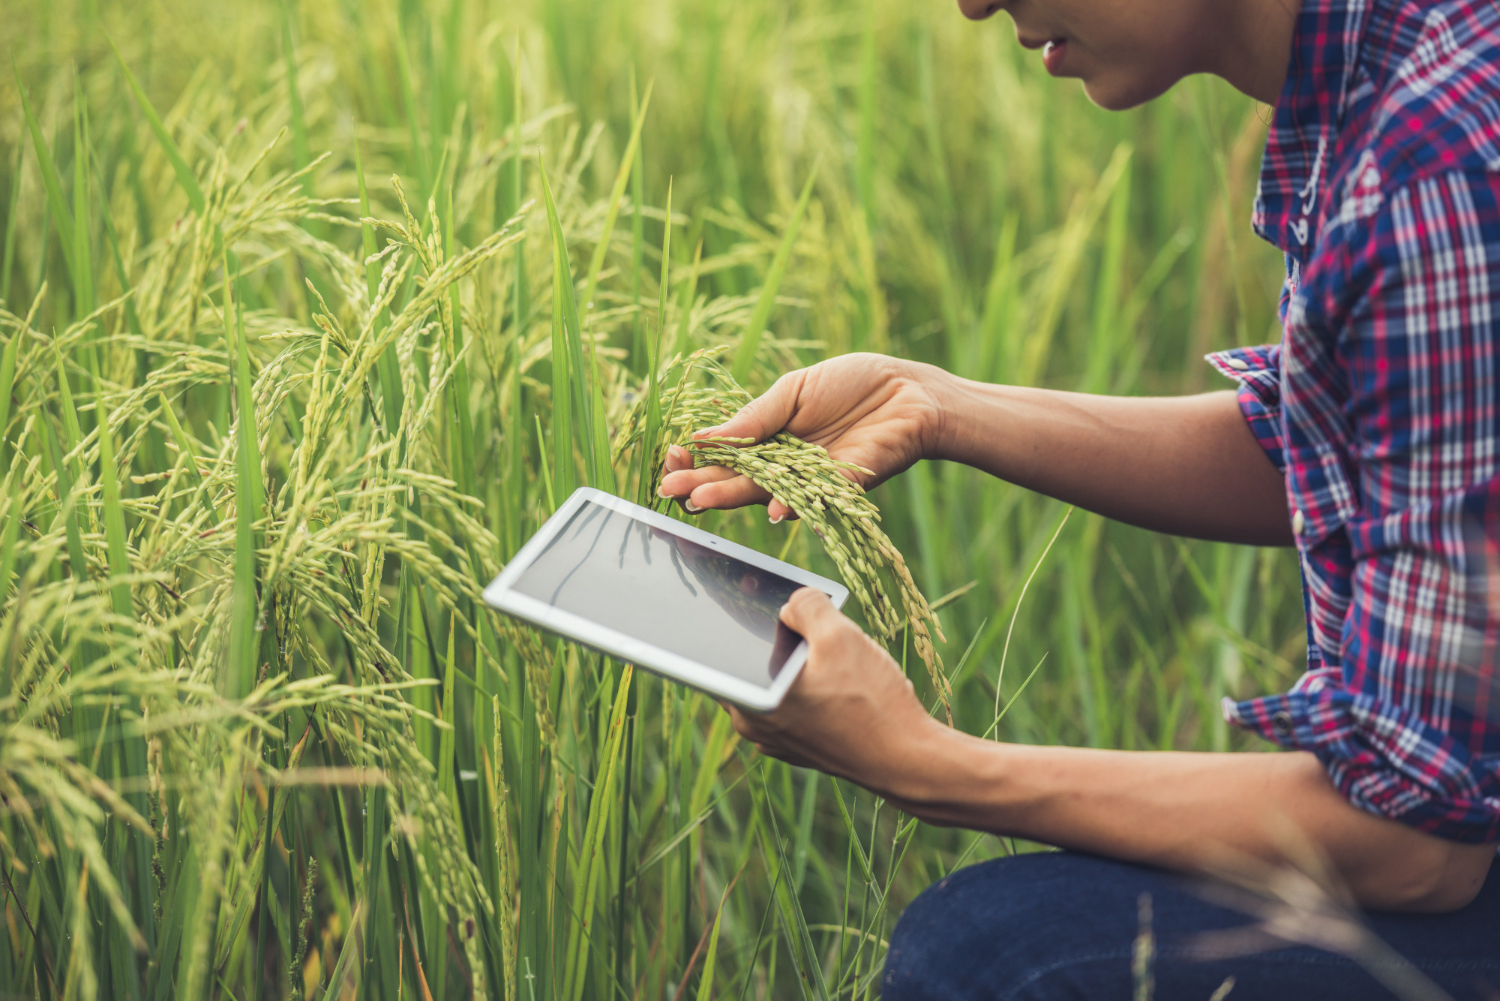 farmer-standing-in-rice-field-with-tablet.jpg - 1.49 MB